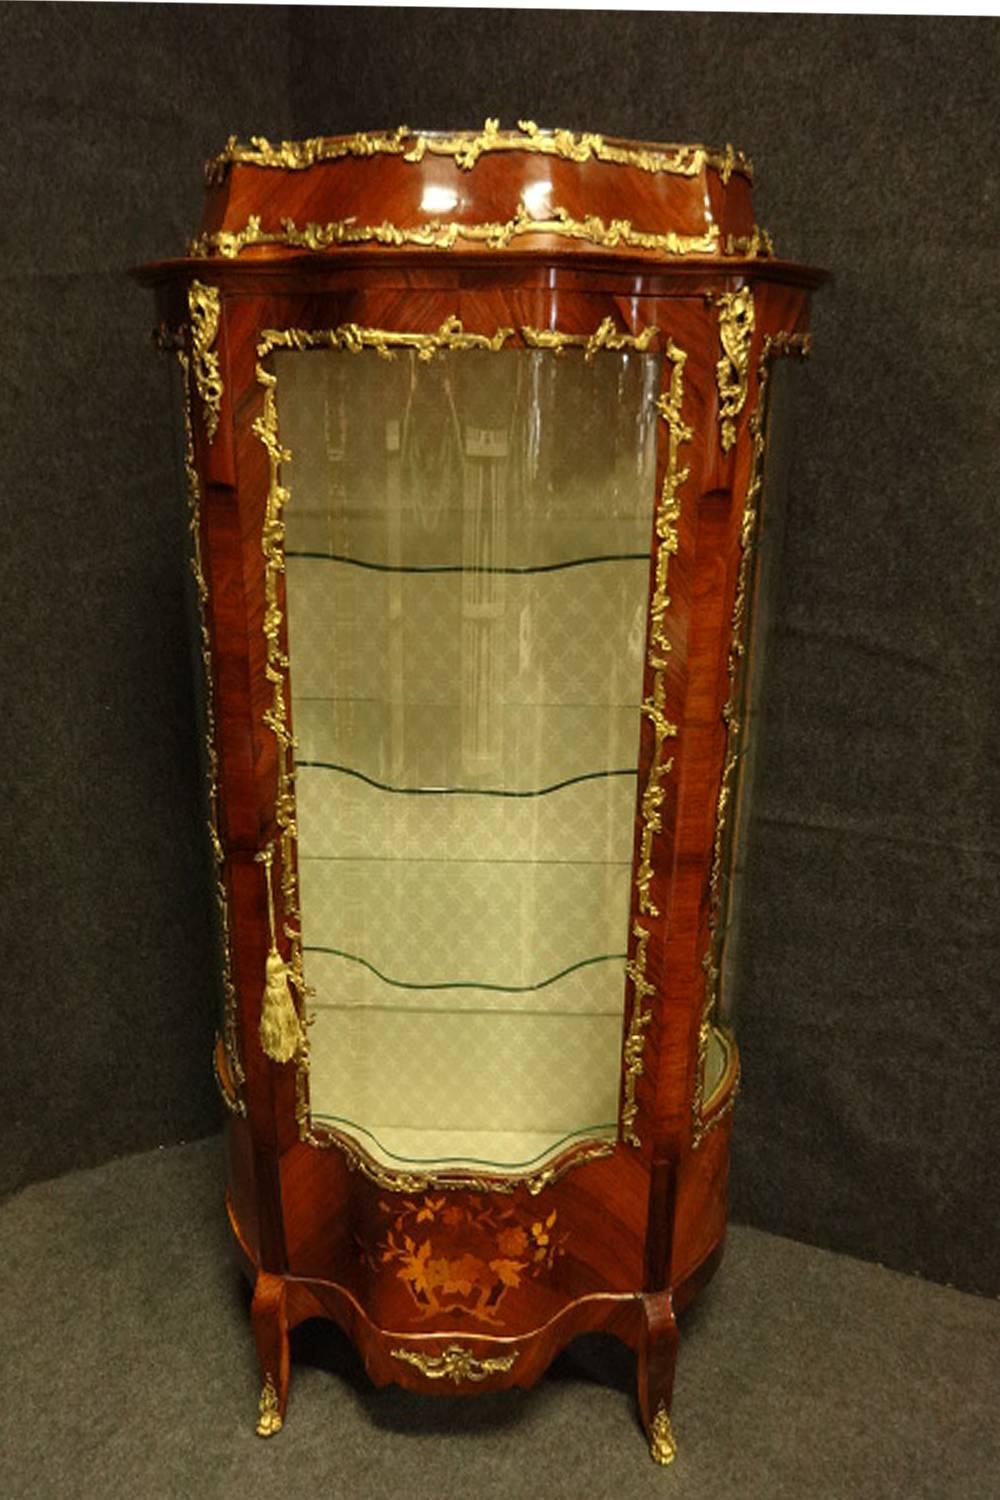 A very good double serpentine fronted kingwood vitreen with floral marquetry panels to the base, bowed glass sides, four shaped plate glass shelves, gilt metal mounts, relined and repolished to a very high standard.
 